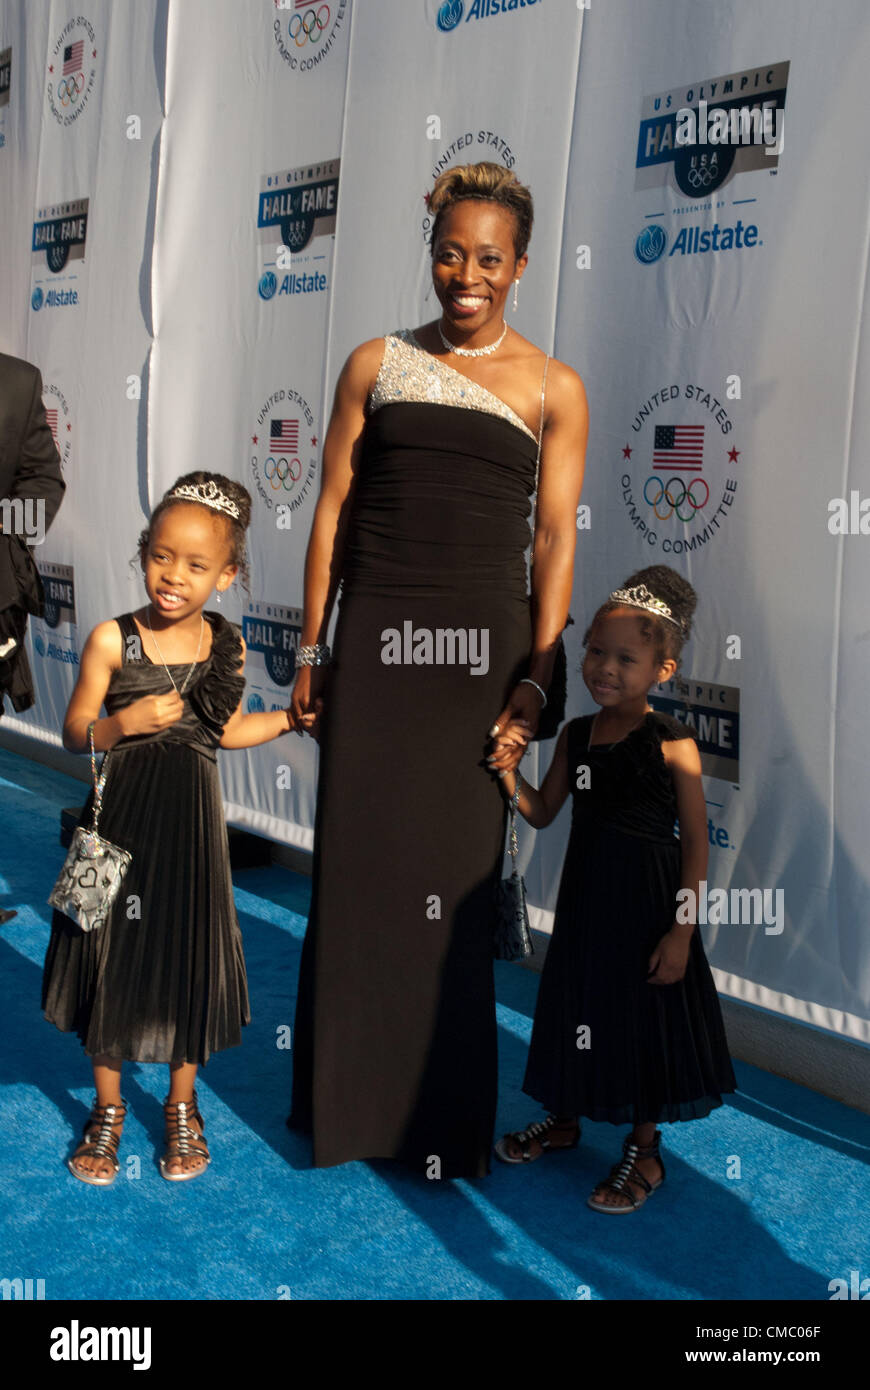 Gail Devers with daughters Karsen and Legacy walk down the blue carpet  before entering the Harris Theater in Chicago where Gail was inducted into  the U.S. Olympic Hall of Fame on July